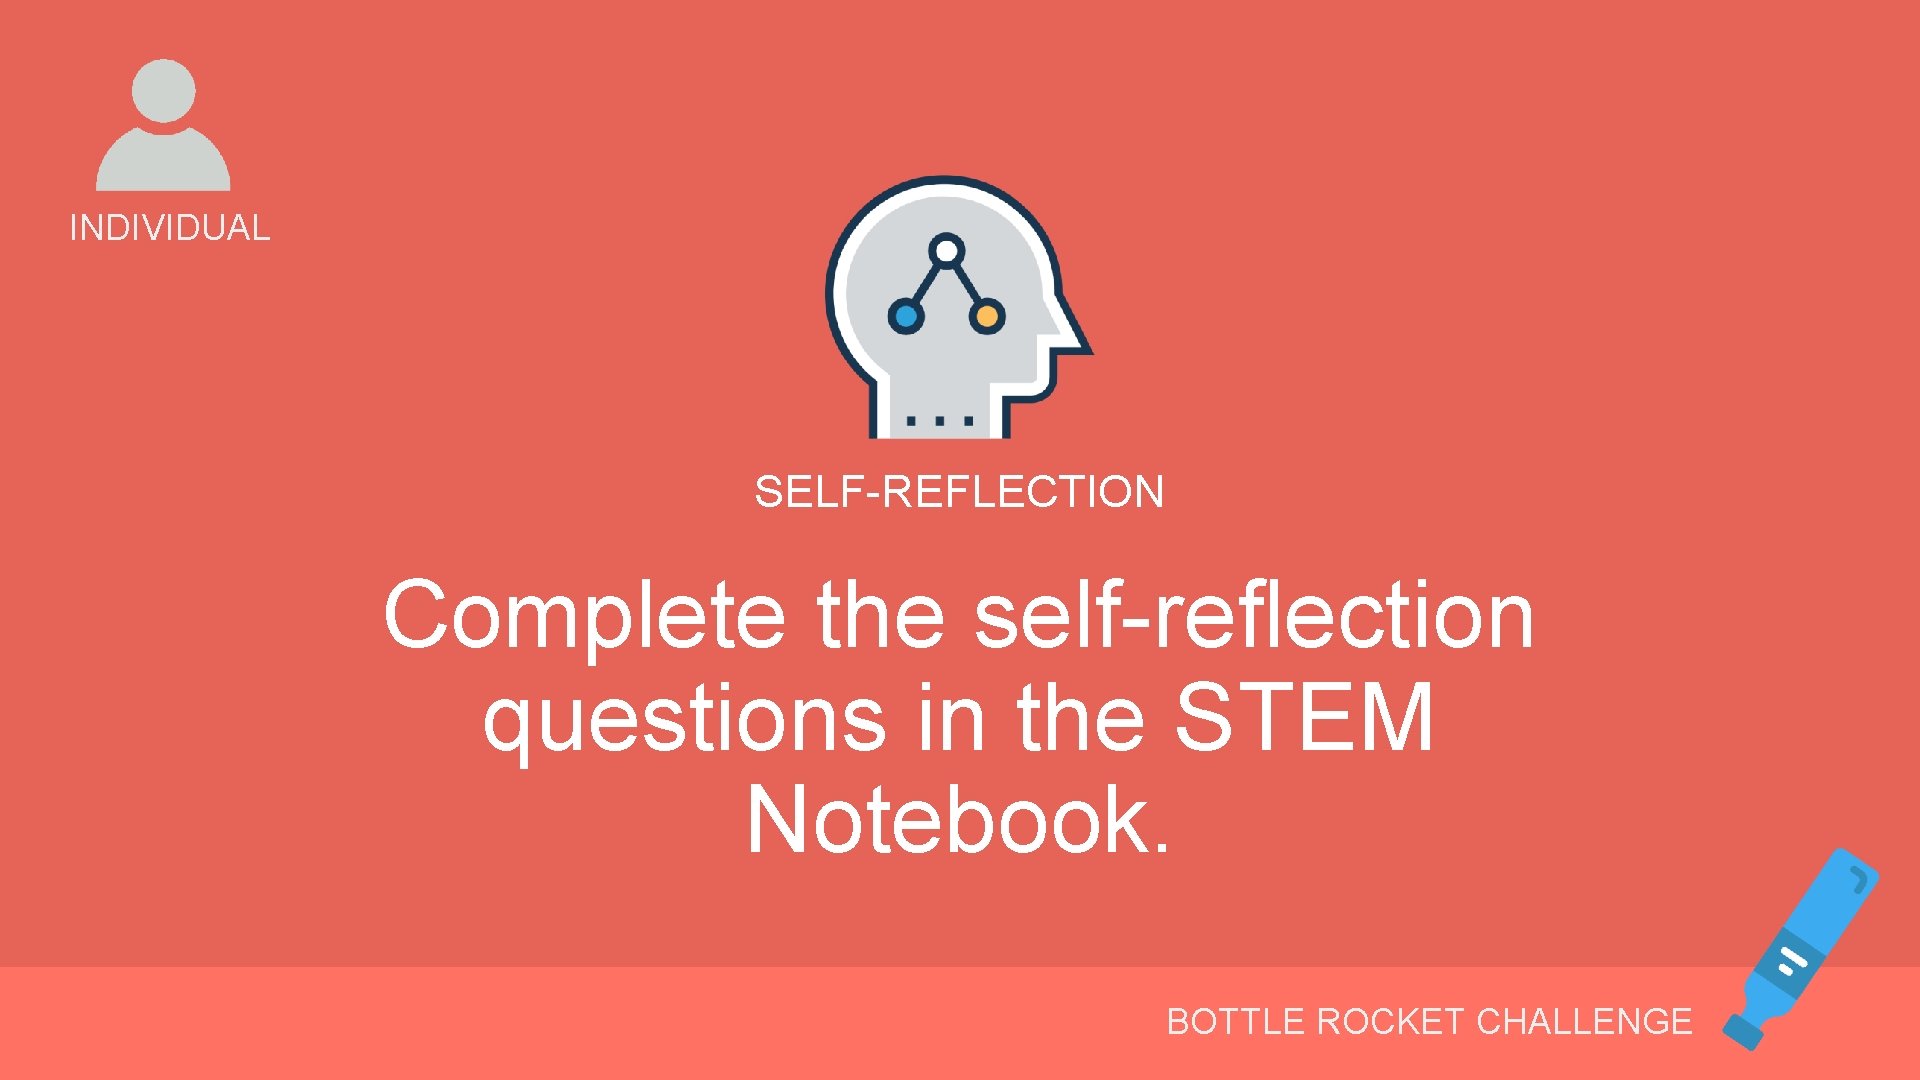 INDIVIDUAL SELF-REFLECTION Complete the self-reflection questions in the STEM Notebook. BOTTLE ROCKET CHALLENGE 